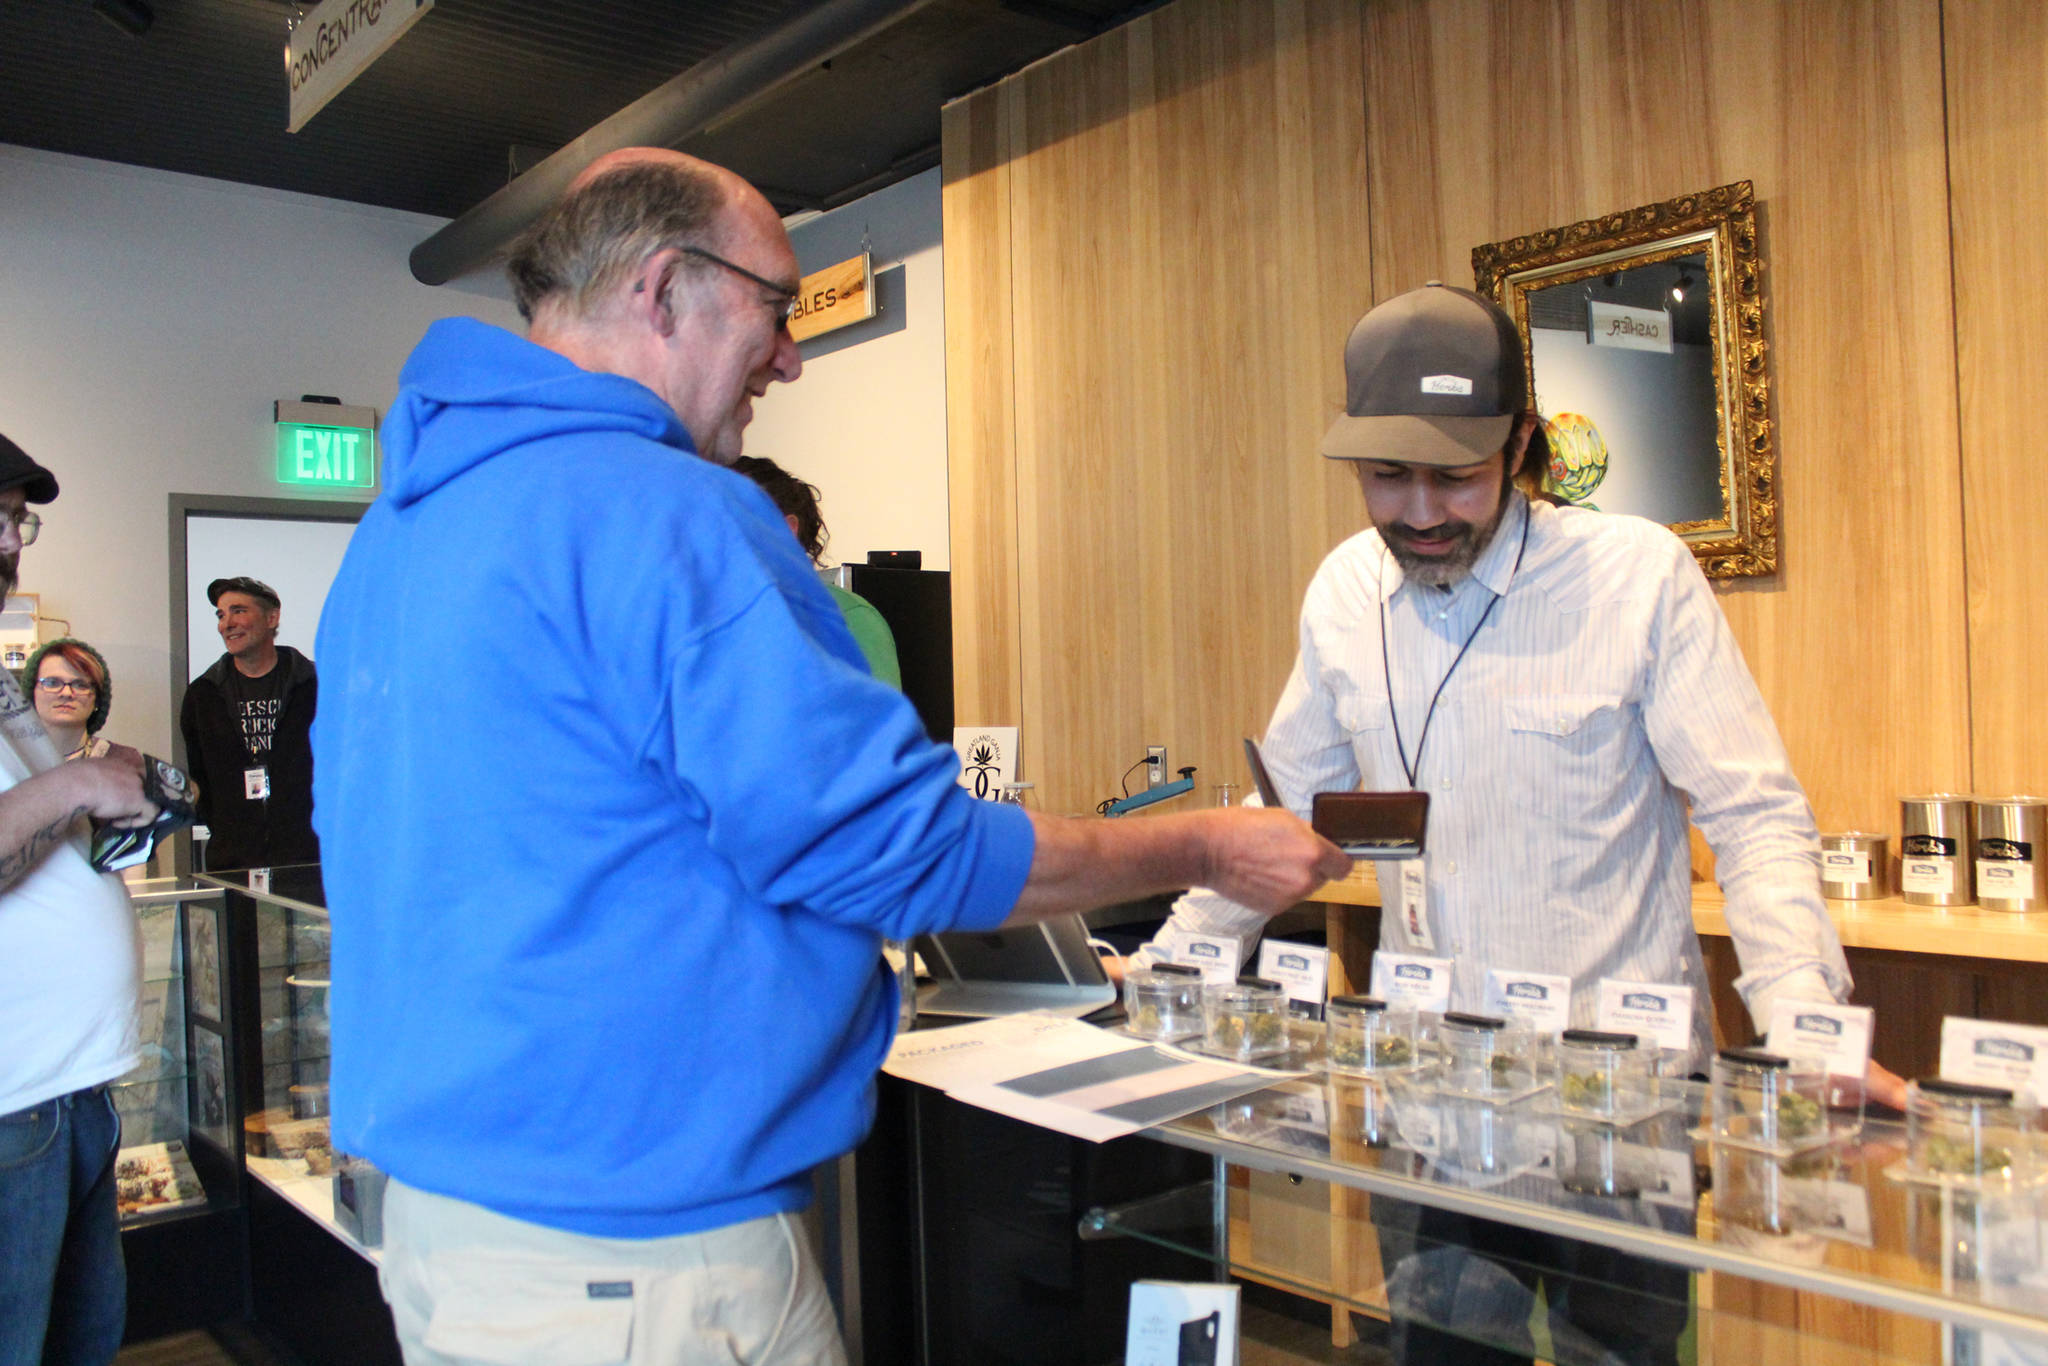 Photo by Megan Pacer/Homer News Former Homer City Council member David Lewis shows his ID to Aaron Stiassny on the opening day of Homer’s first marijuana retail store, Uncle Herb’s, on Thursday, May 24 in Homer. Stiassny will oversee the business for his father, Lloyd, who owns another branch in Anchorage.